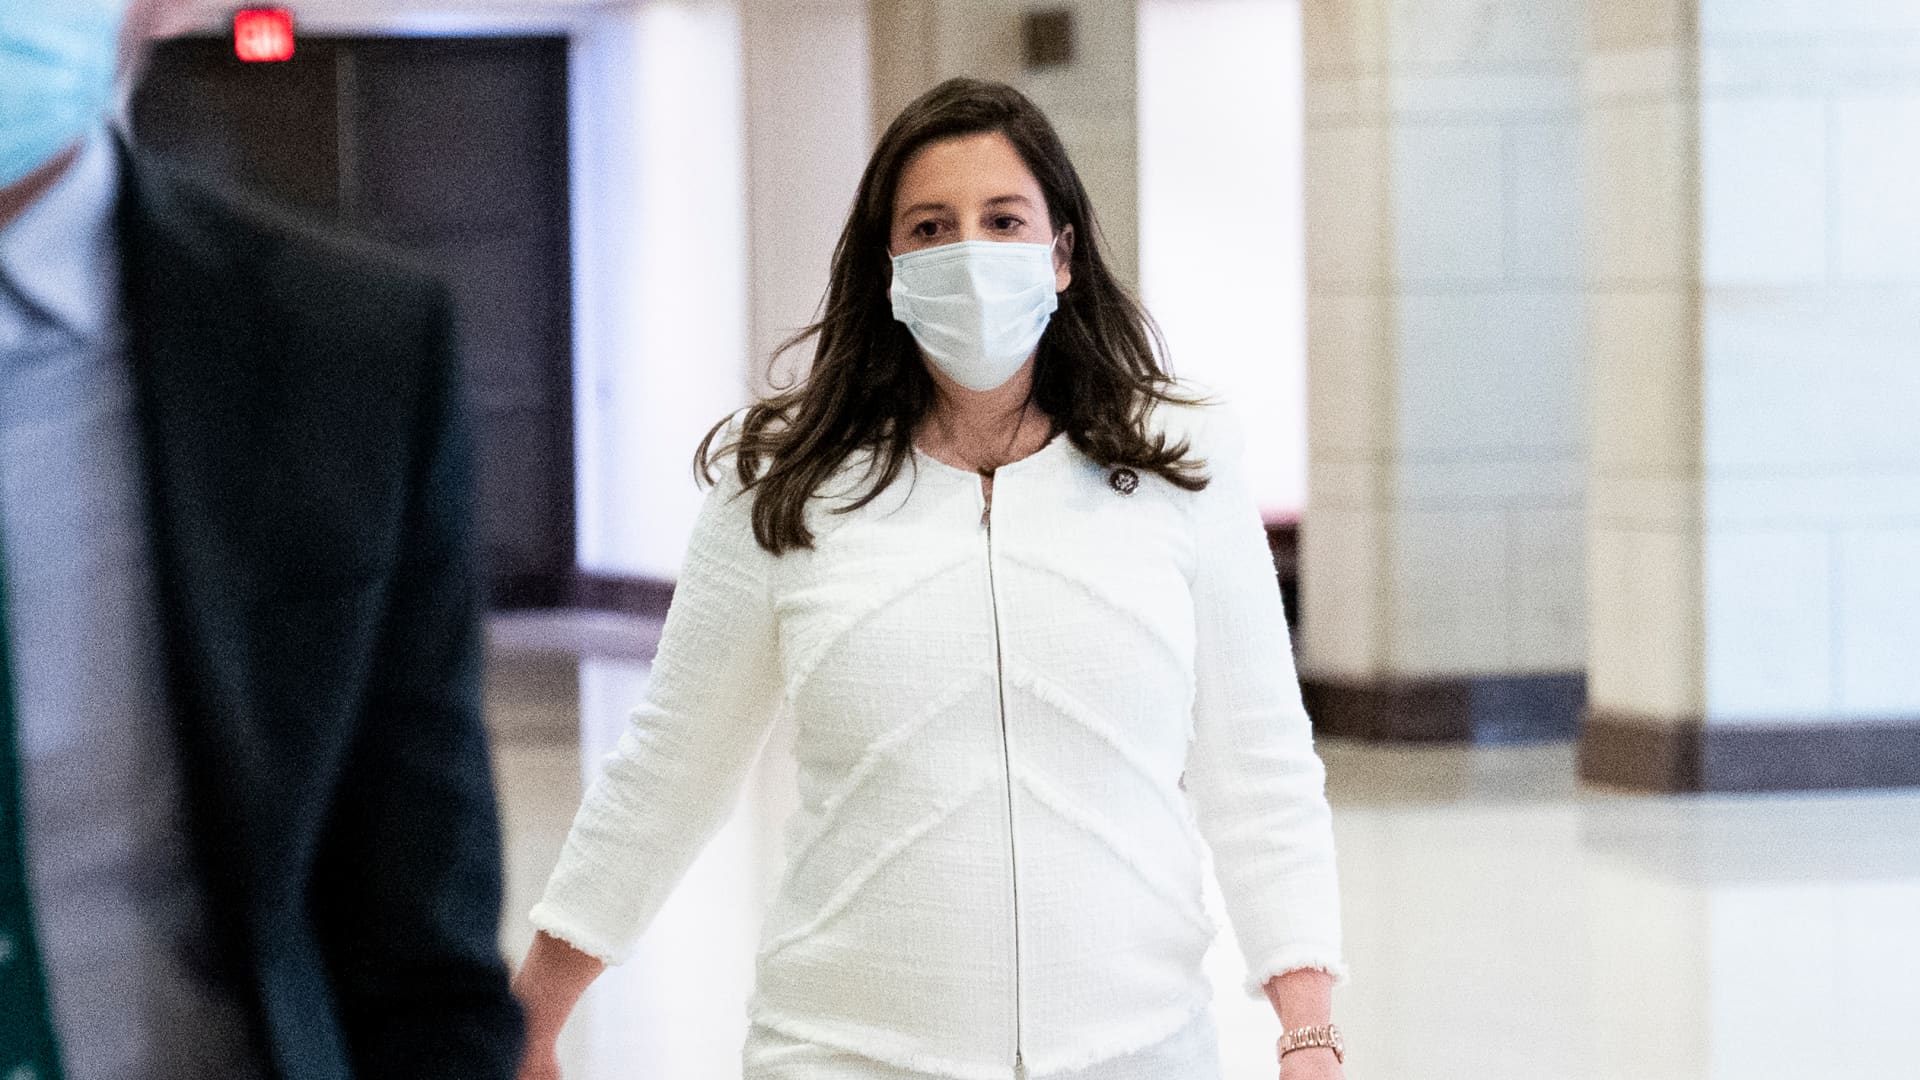 Rep. Elise Stefanik, R-N.Y., arrives for the House Republican Conference meeting where she is expected to be voted in to replace Rep. Liz Cheney, R-Wyo., as chair of the House Republicans Conference in the Capitol on Wednesday, May 12, 2021.